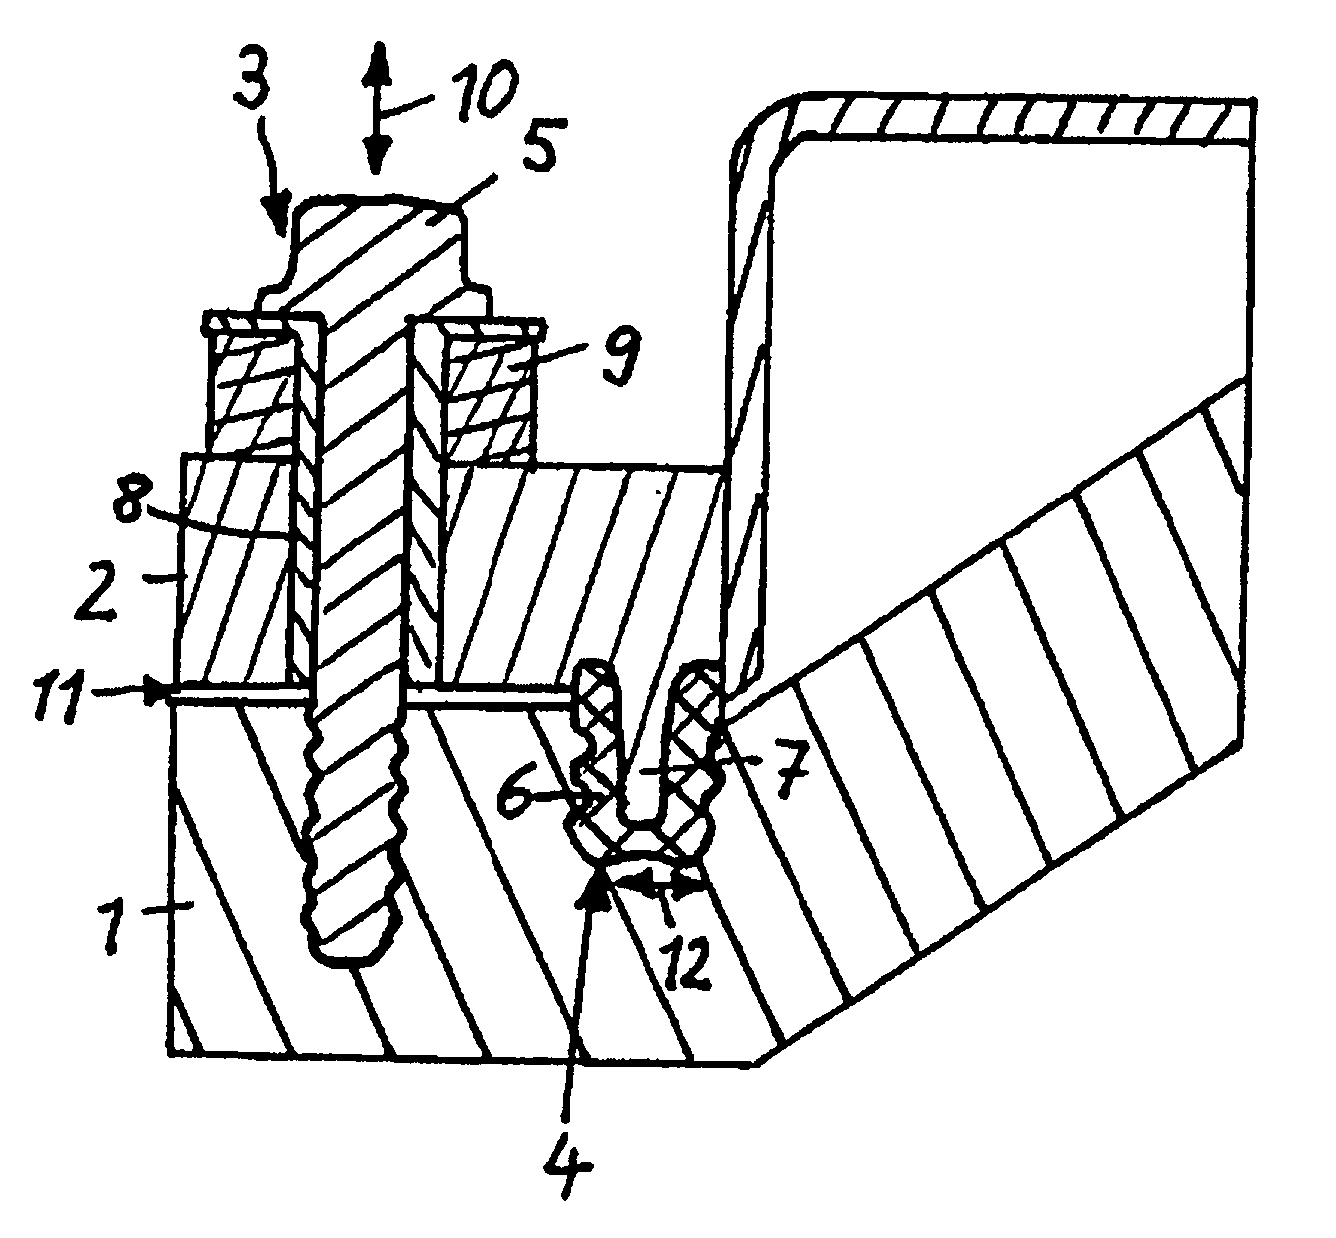 Cylinder head cover for a cylinder head of an internal combustion engine